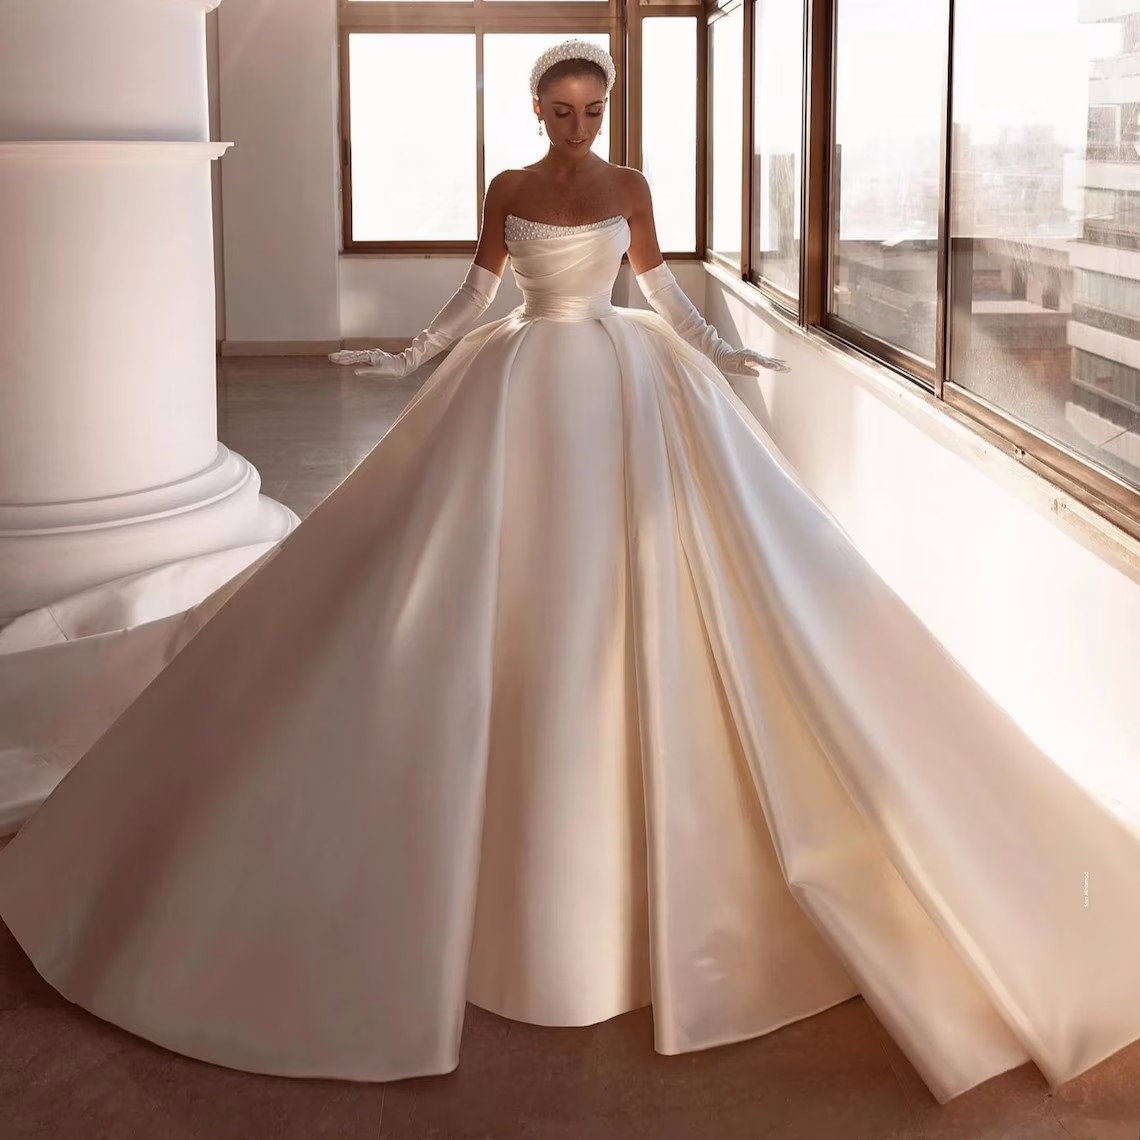 Luxury Tiered Satin Ball Gown Wedding Dress Robe De Marriage Sleeveless Beading Pearls Off The Shoulder Bridal Skirts